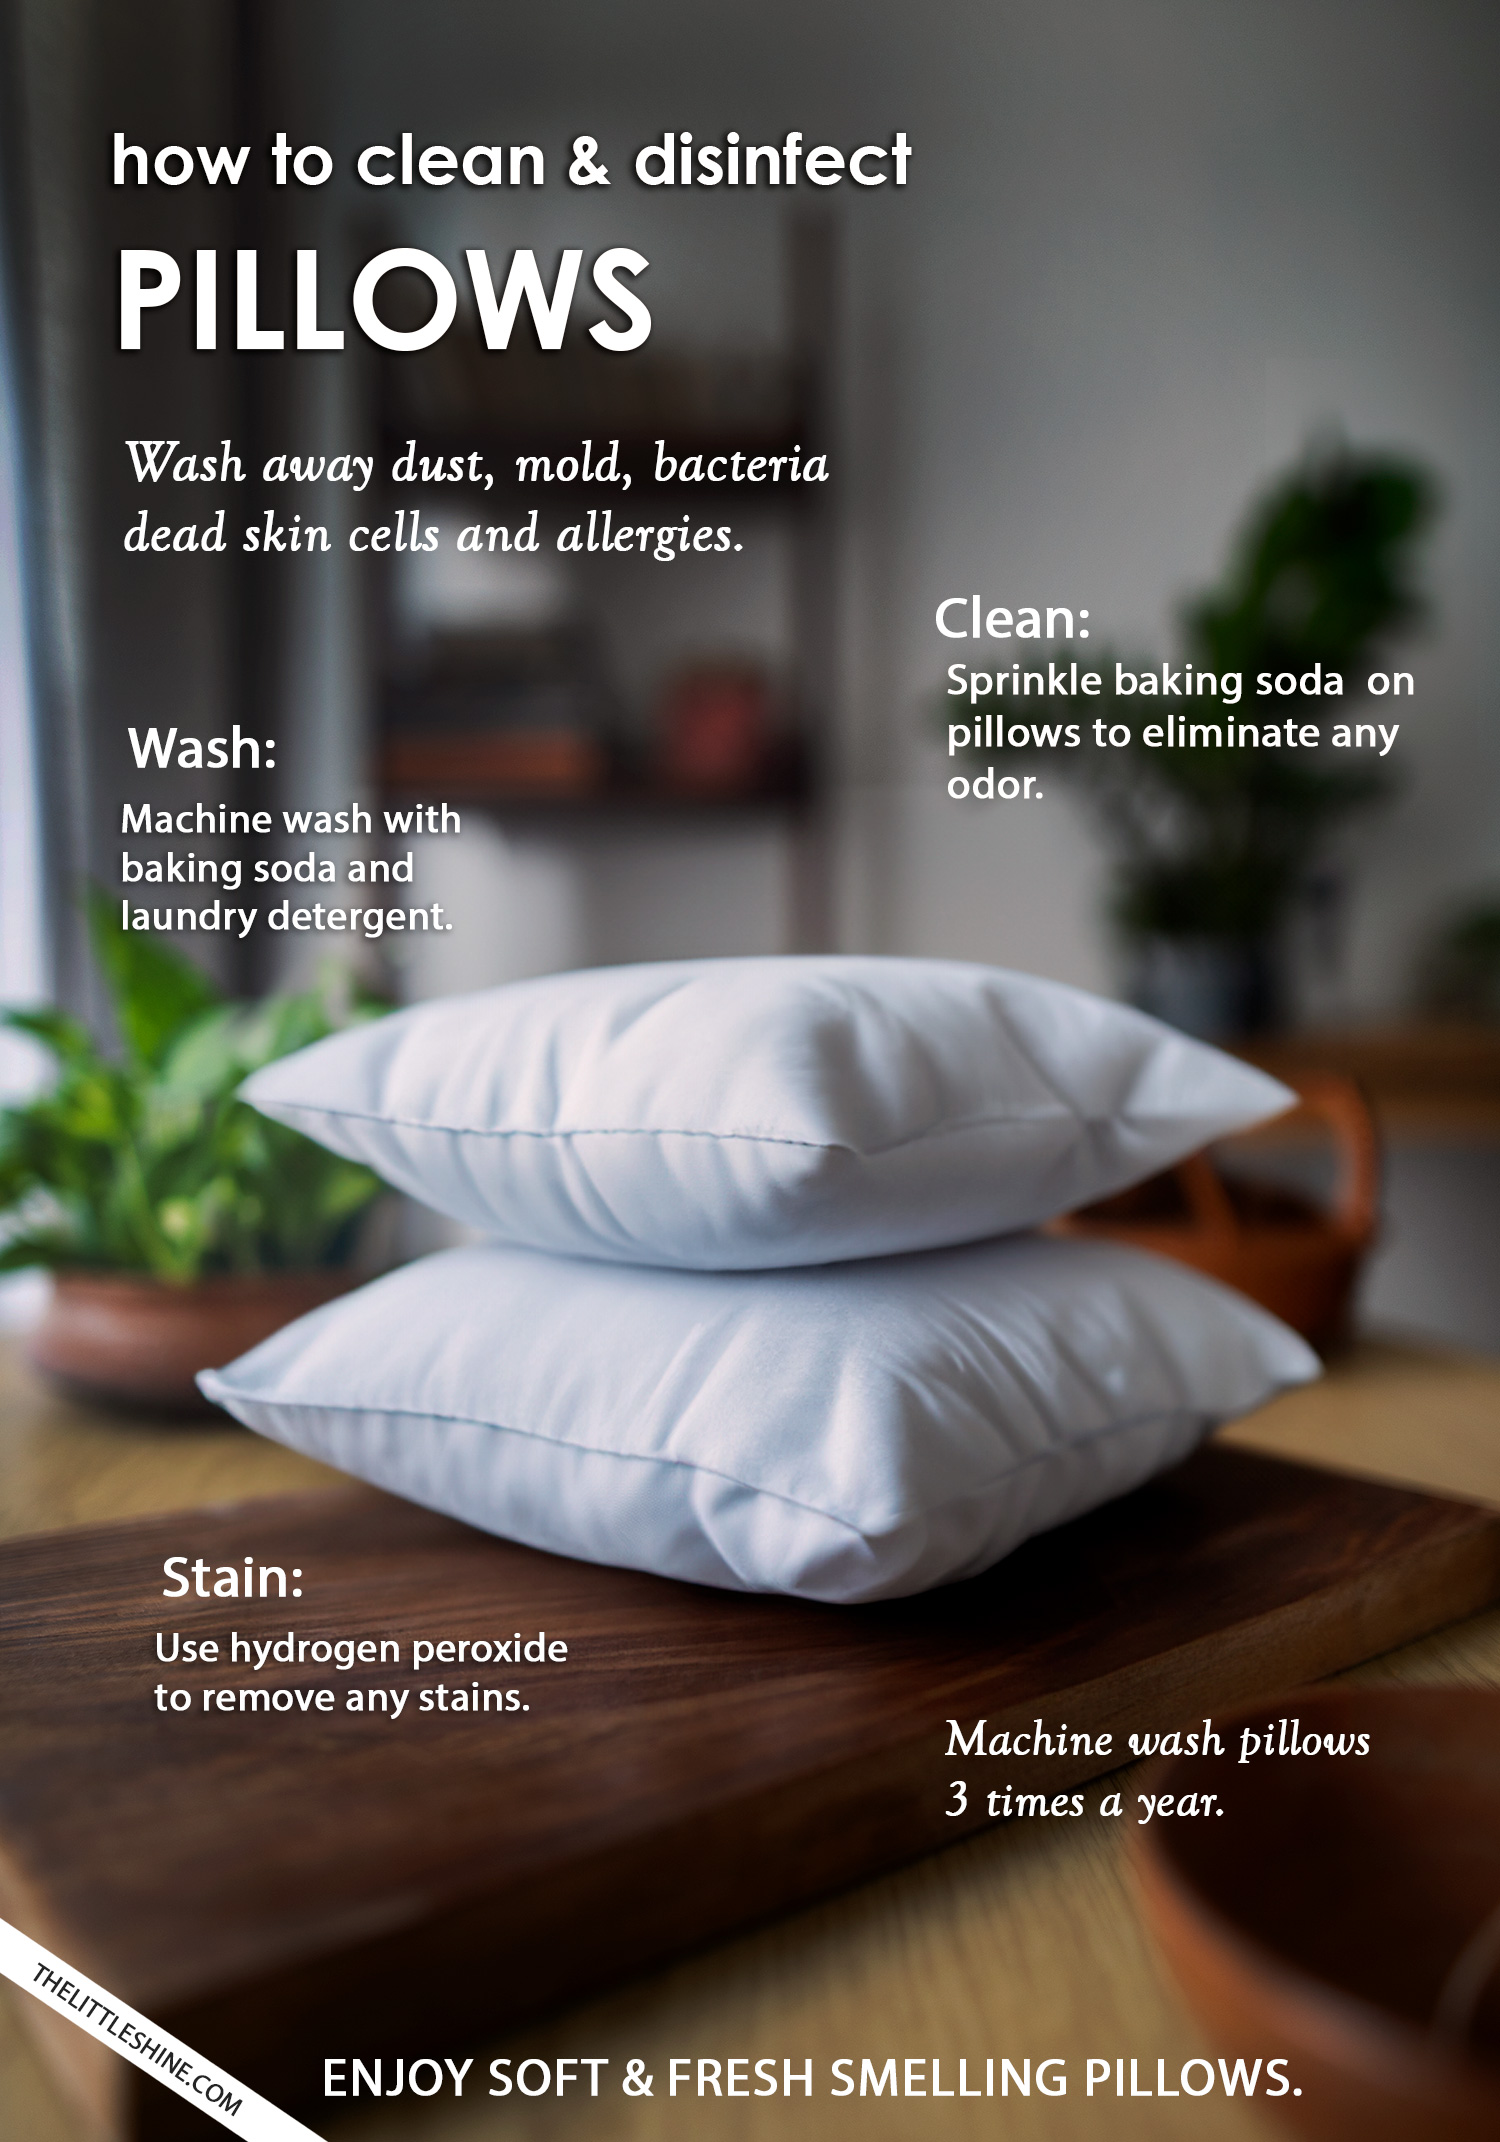 How to properly clean and disinfect your bed pillows